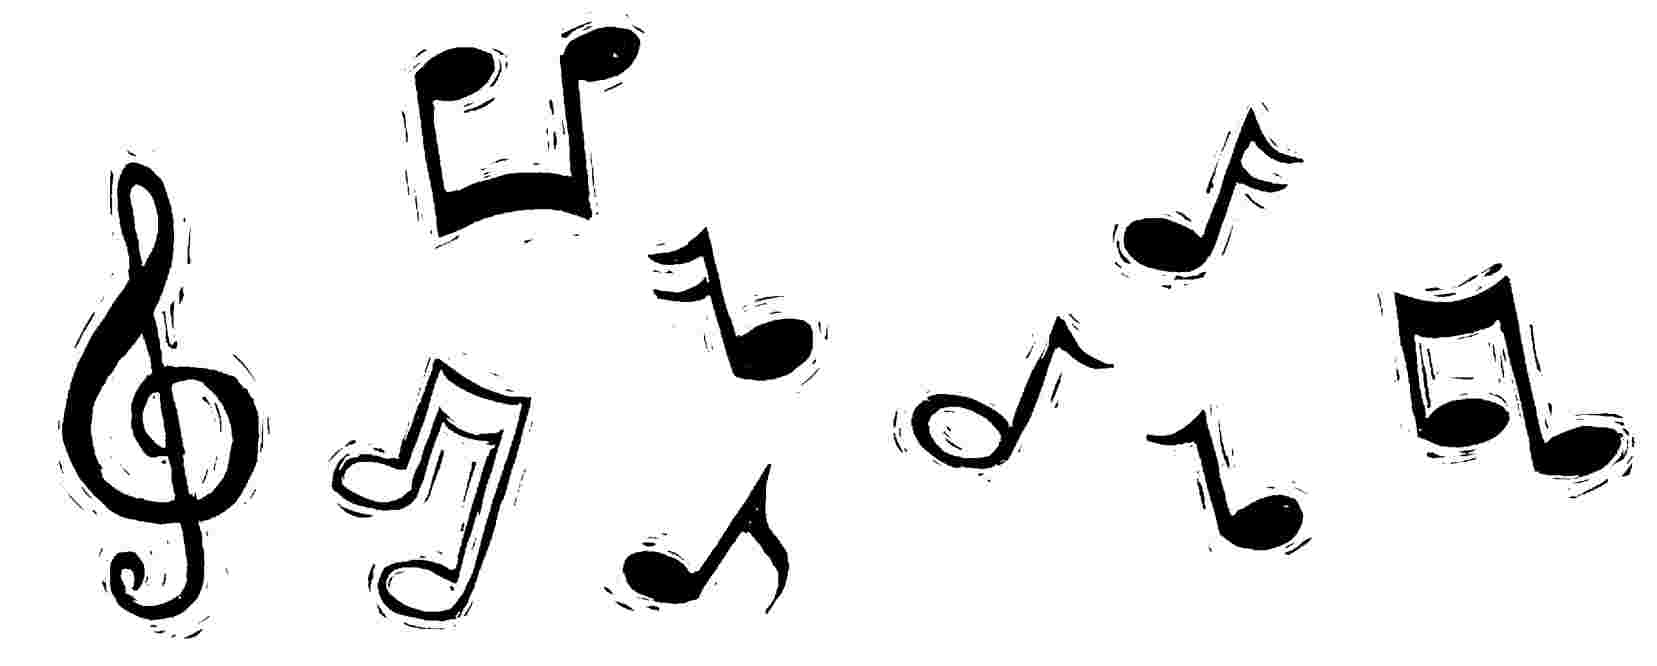 Drawings Of Music Notes - ClipArt Best